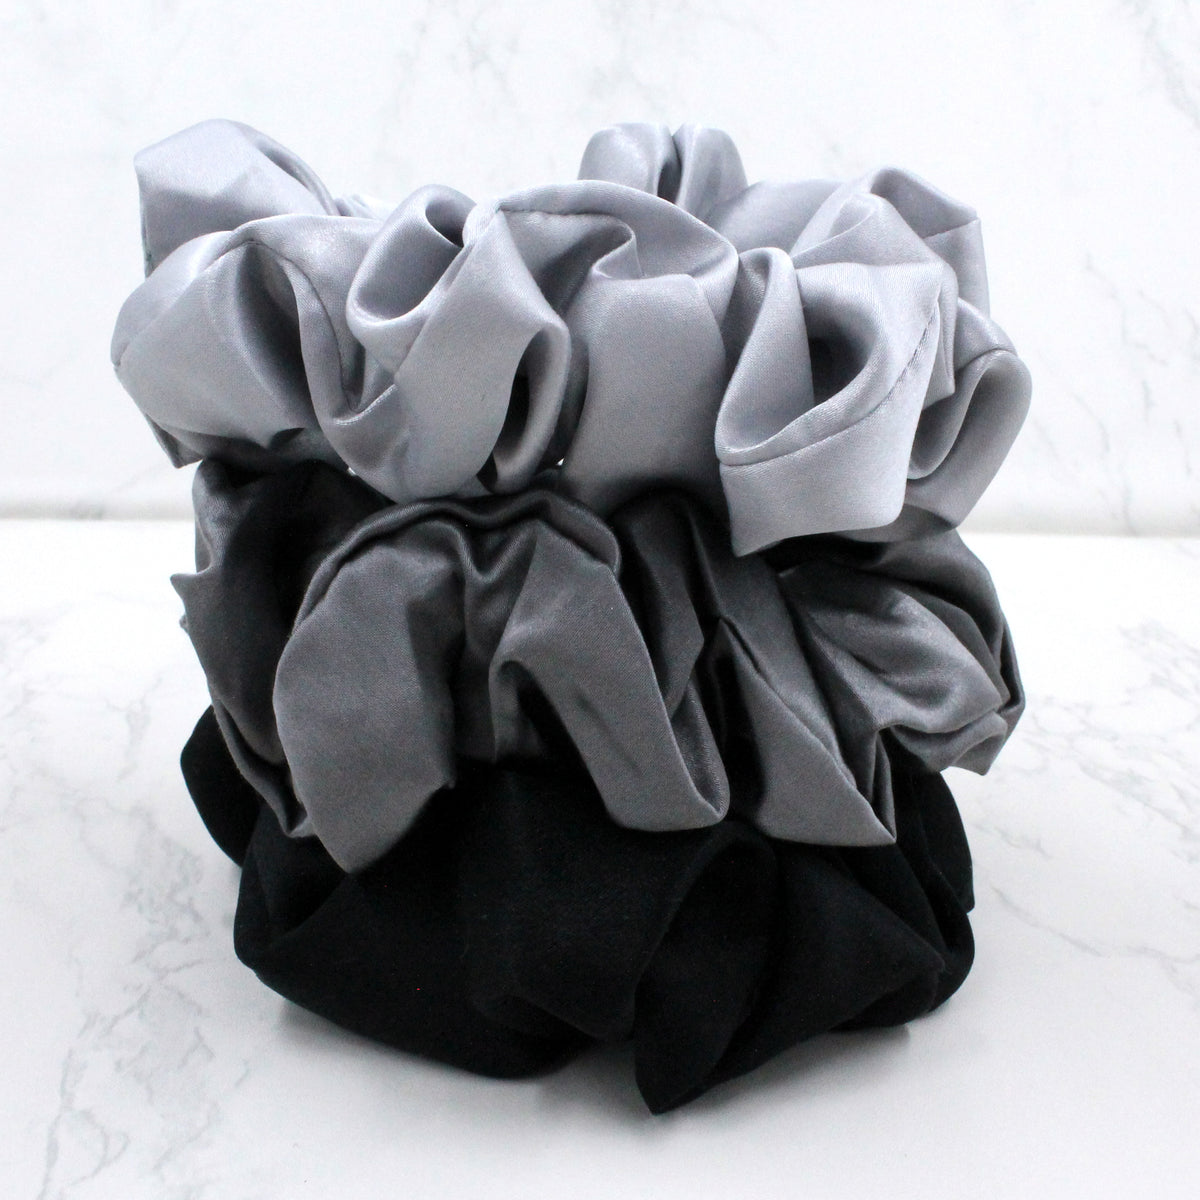 Mulberry Park Silks Silk Scrunchies - Midnight Black, Shimmery Silver, and Gunmetal Grey Large Stack